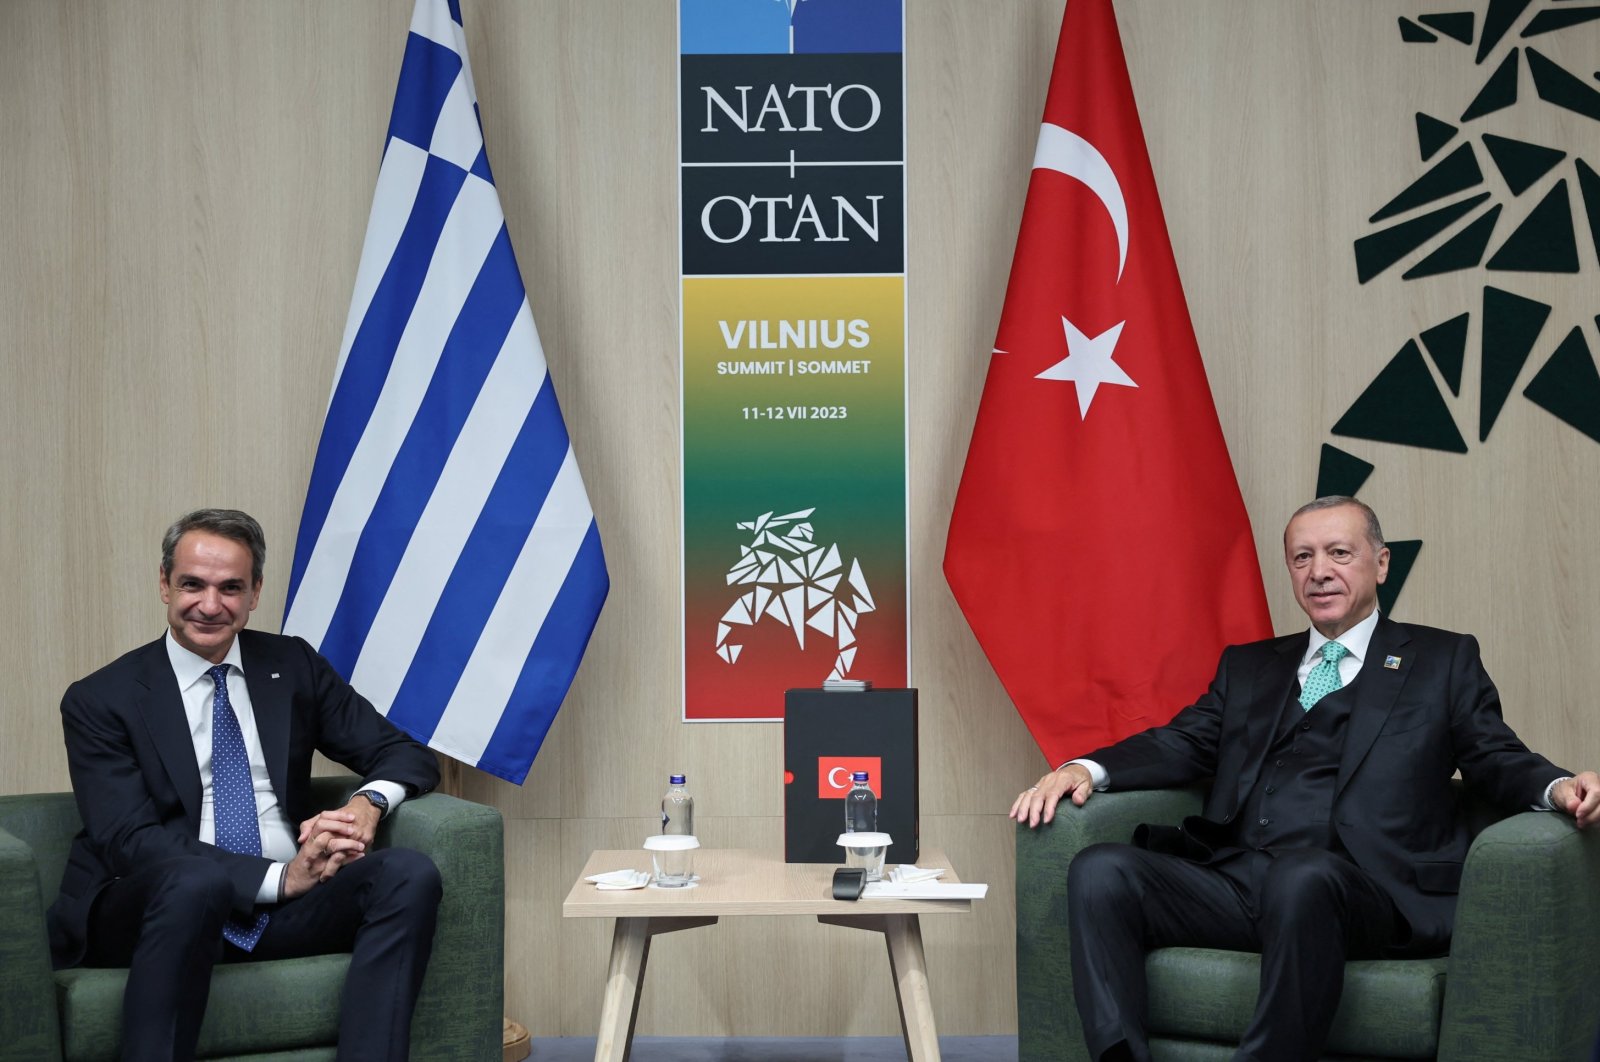 President Recep Tayyip Erdoğan meets with Greek Prime Minister Kyriakos Mitsotakis during a NATO leaders summit in Vilnius, Lithuania, July 12, 2023. (Reuters File Photo)